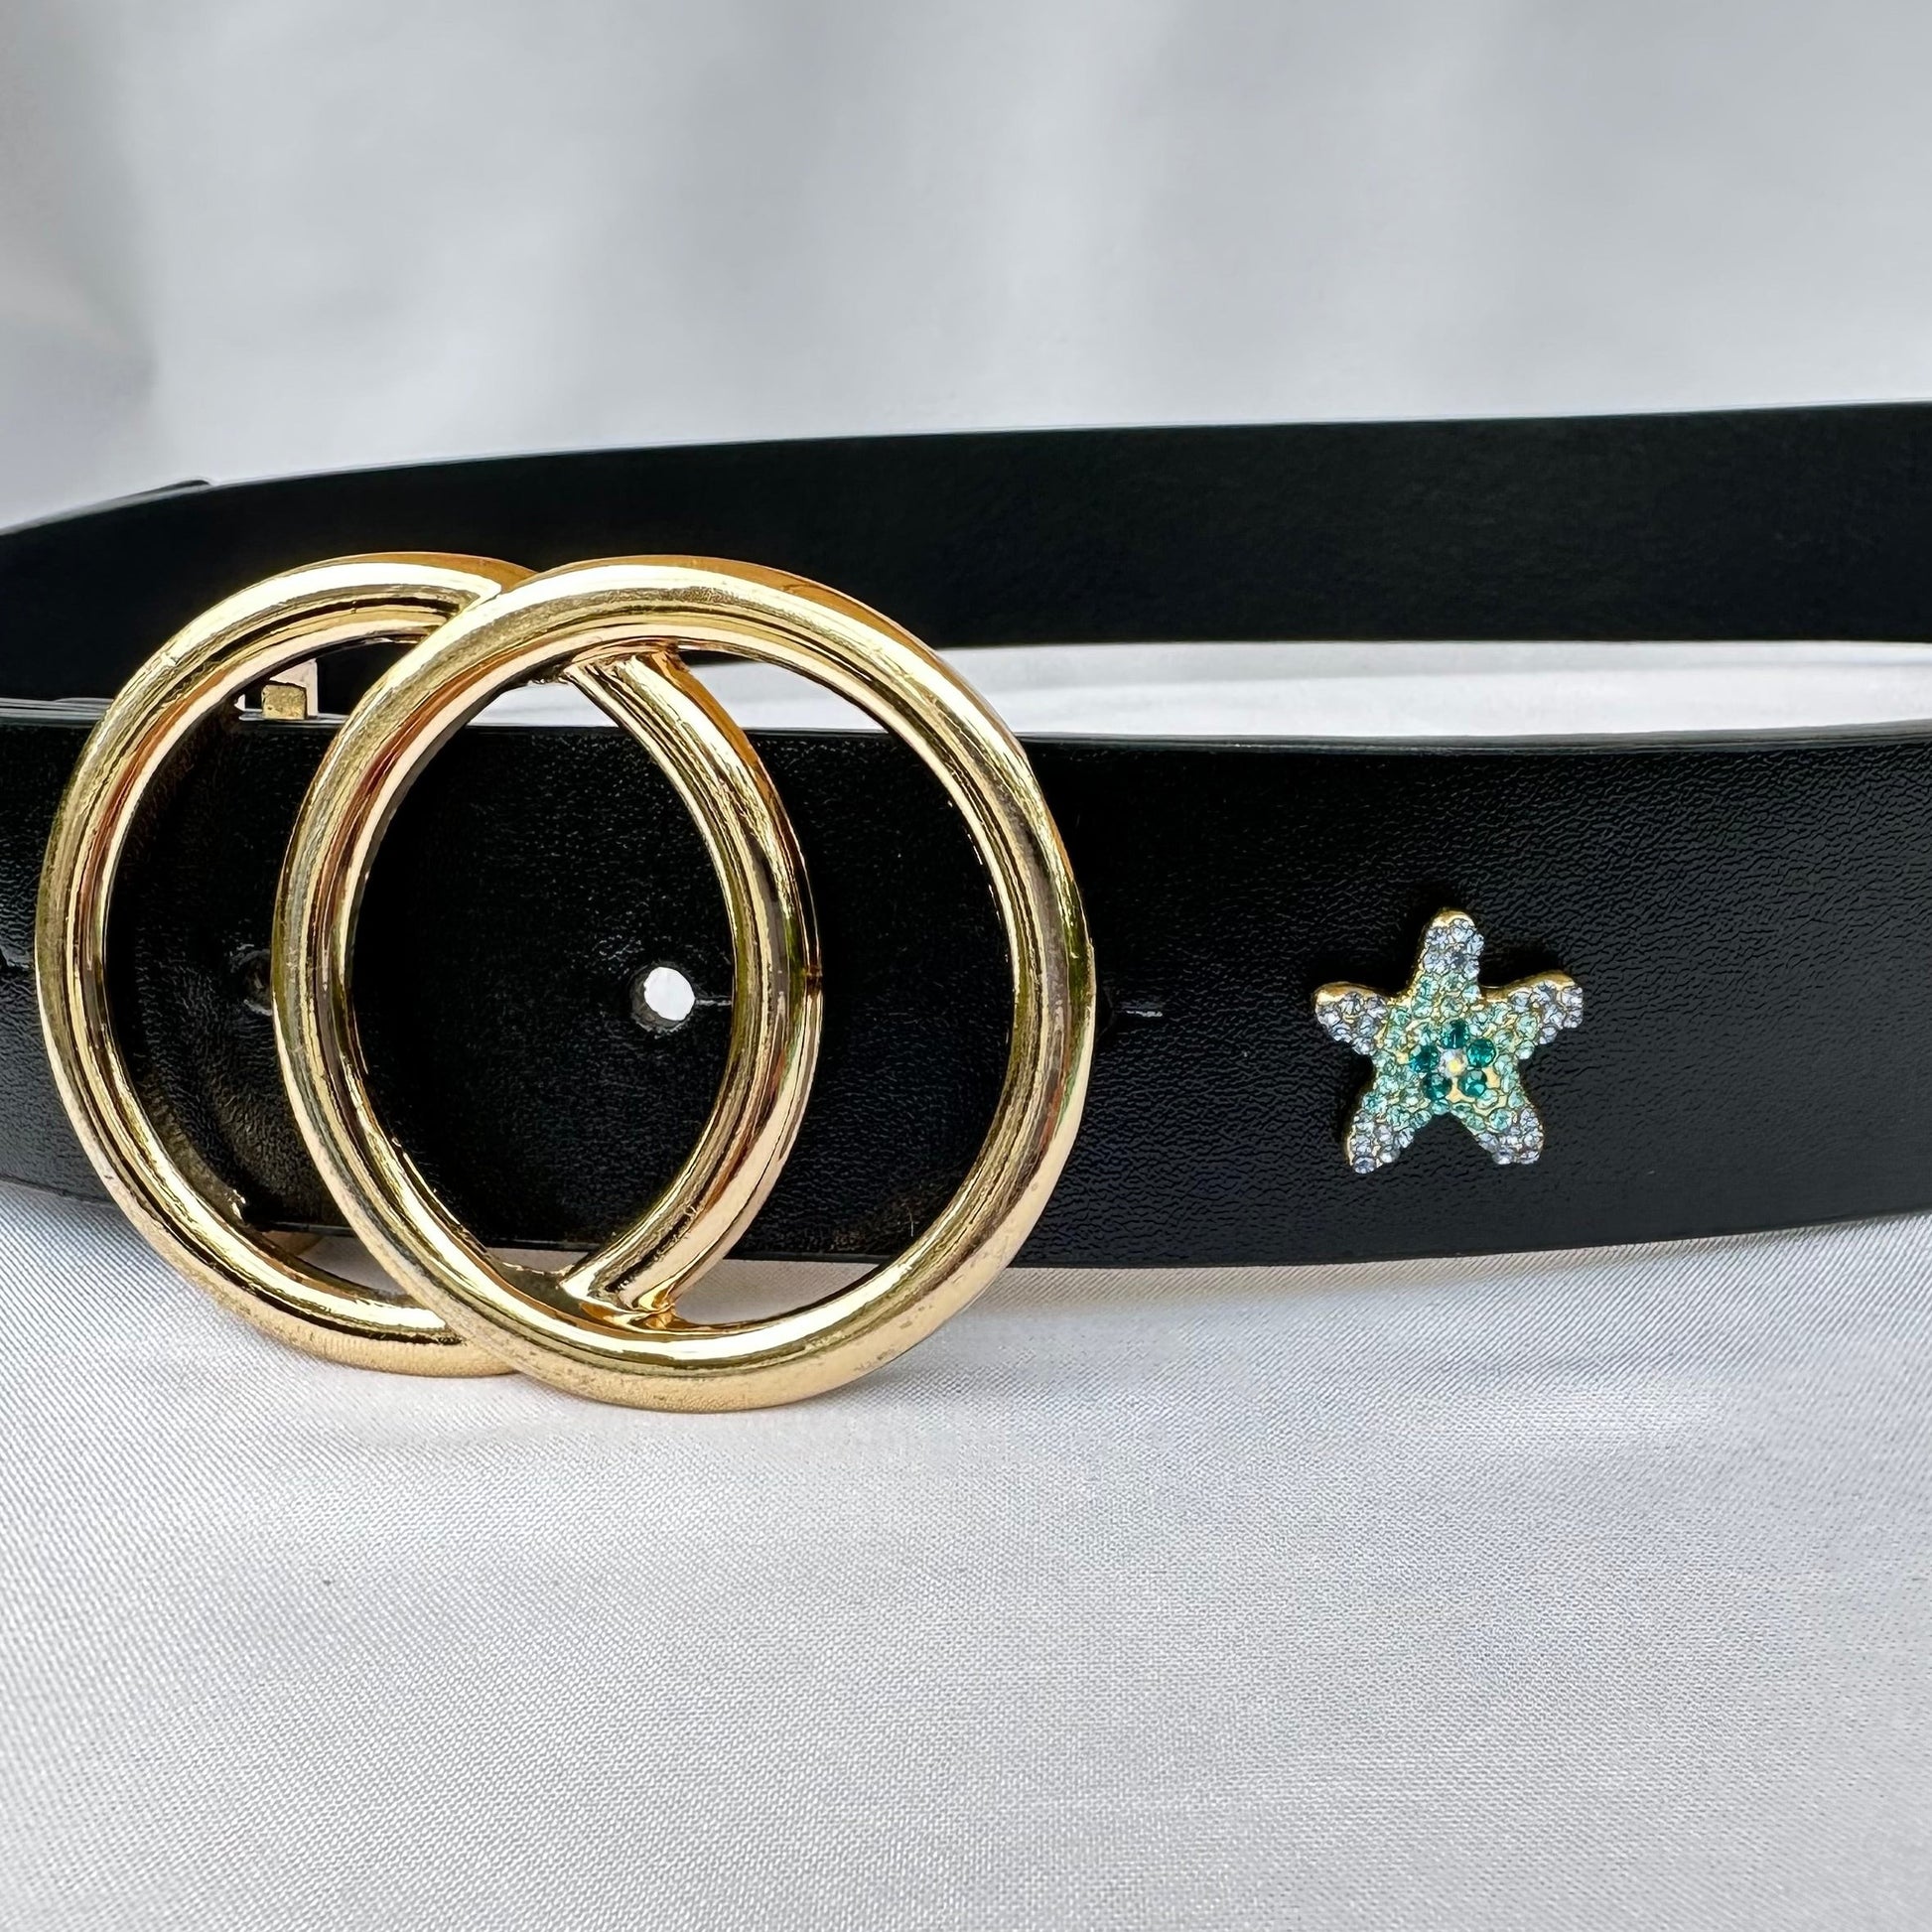 Star Fish Belt, Bag and Watch Band Charm 